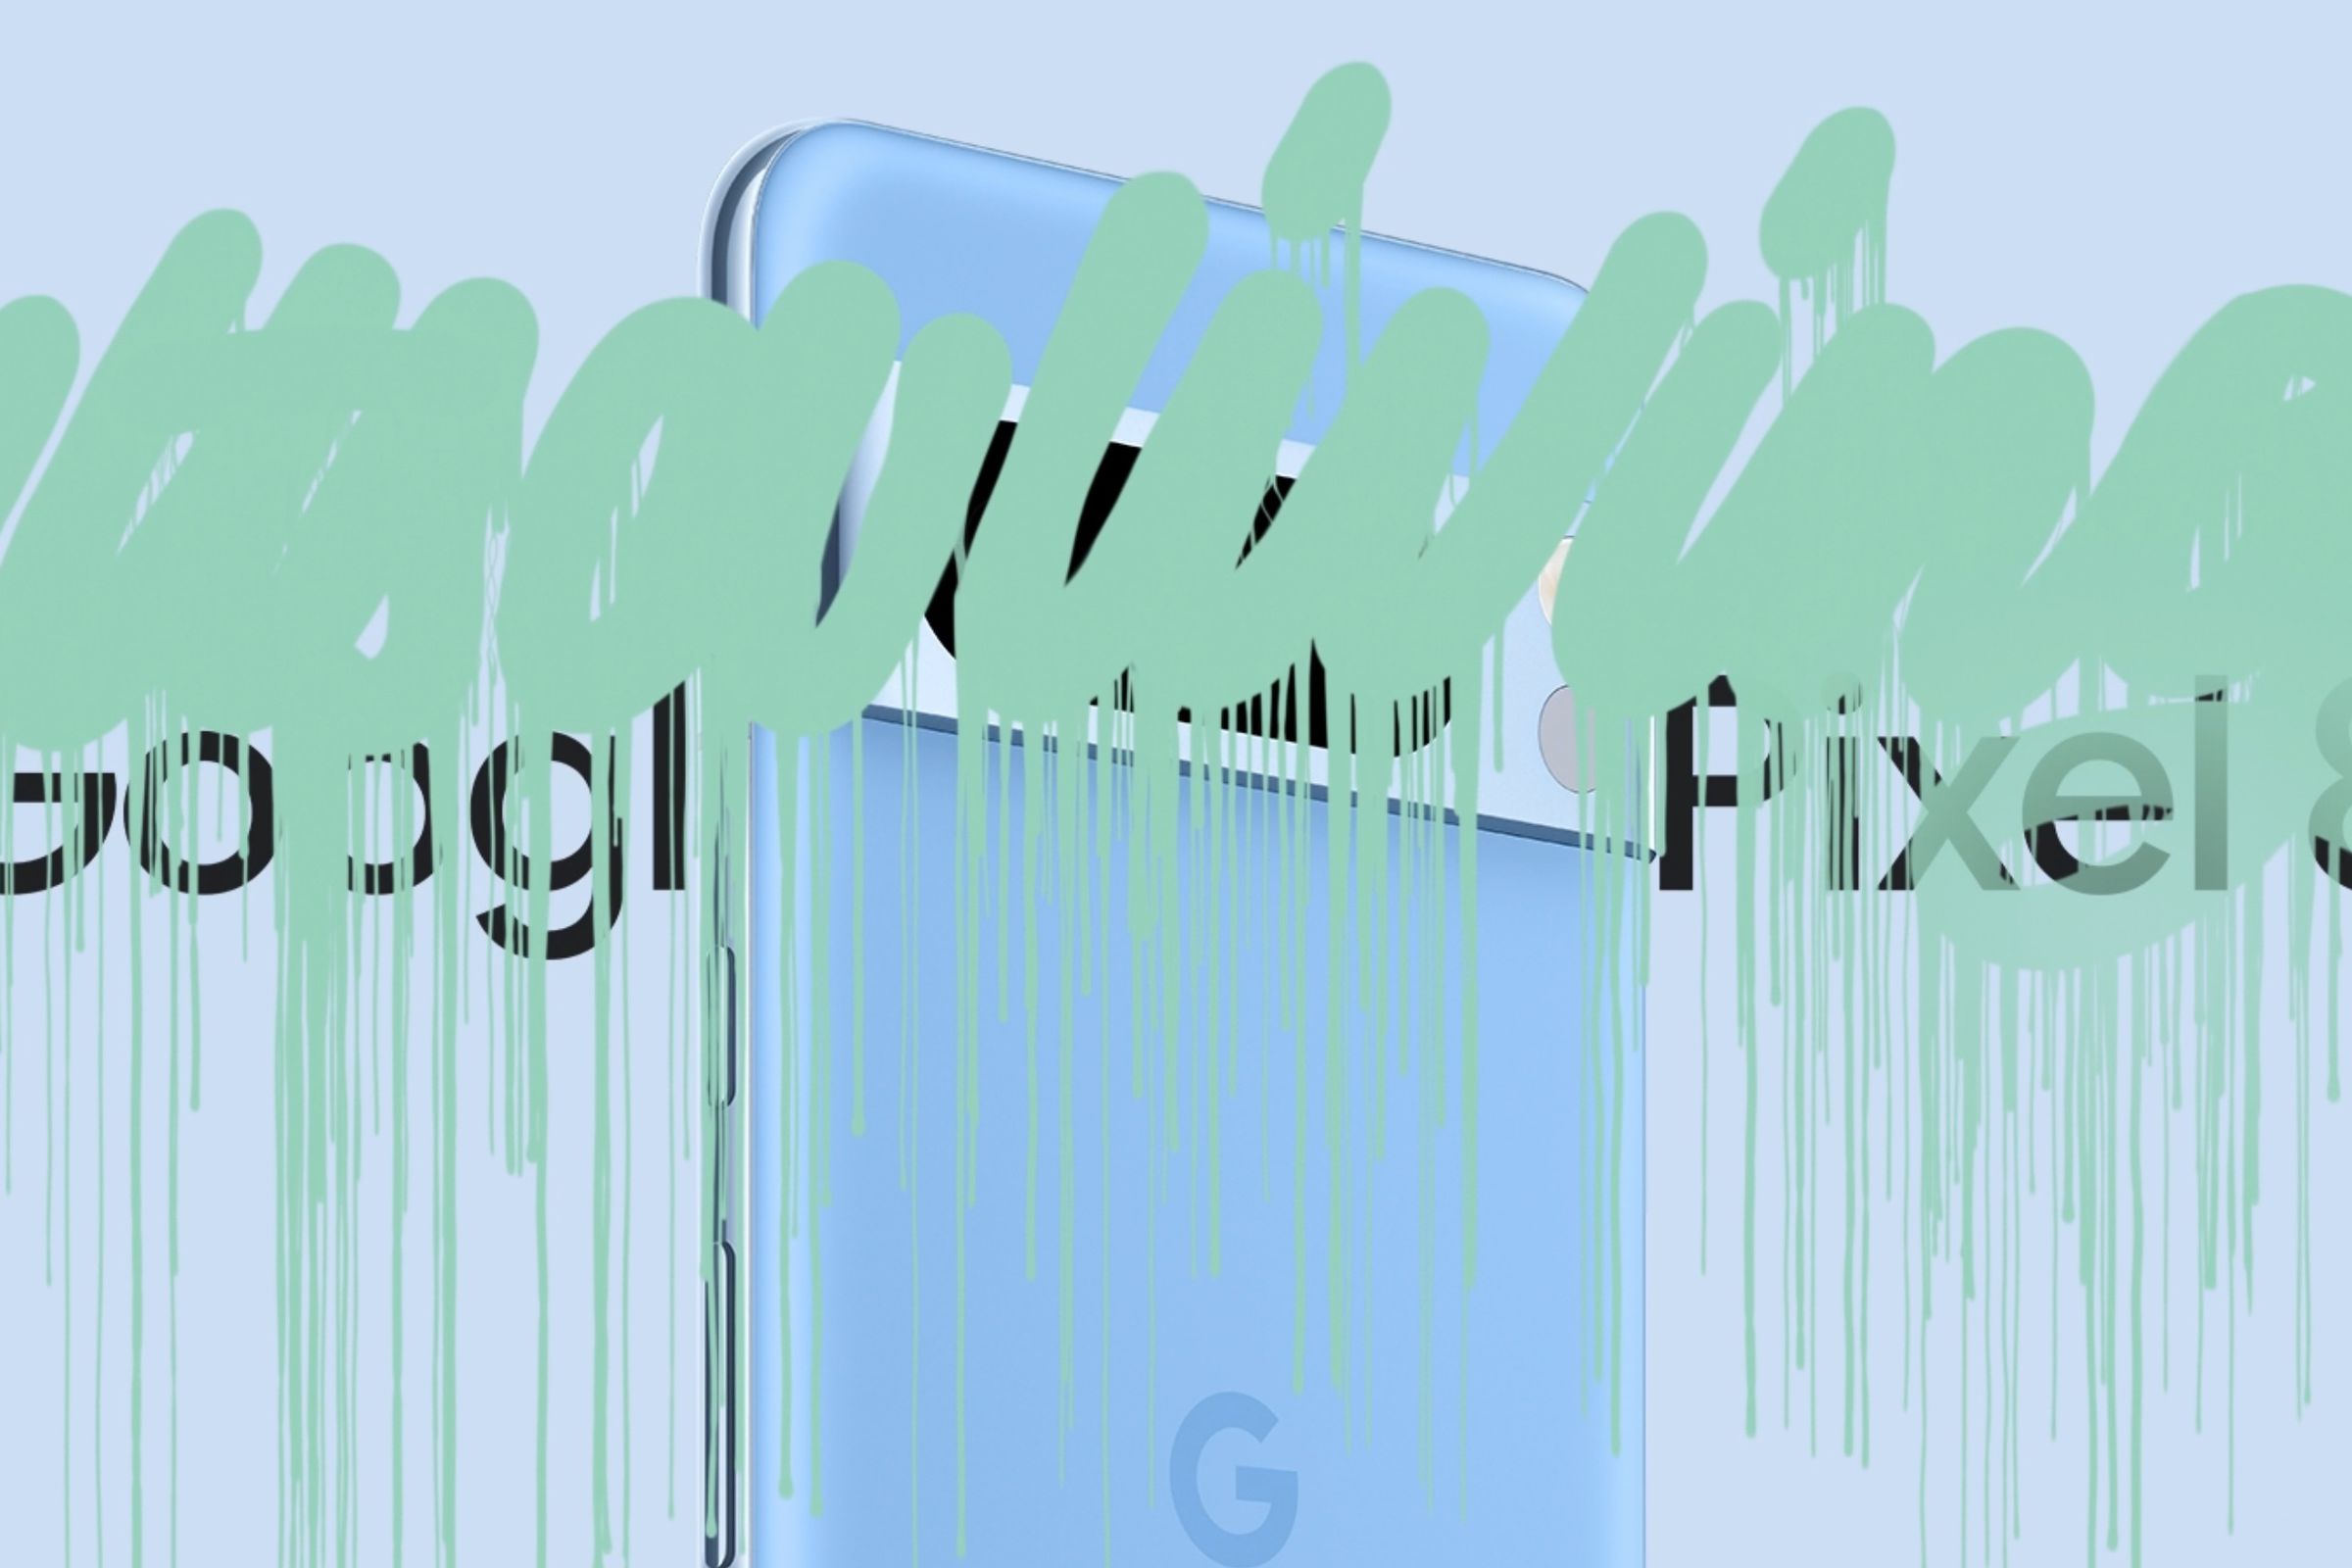 A promotional image of a Pixel 8 teasing a new color.